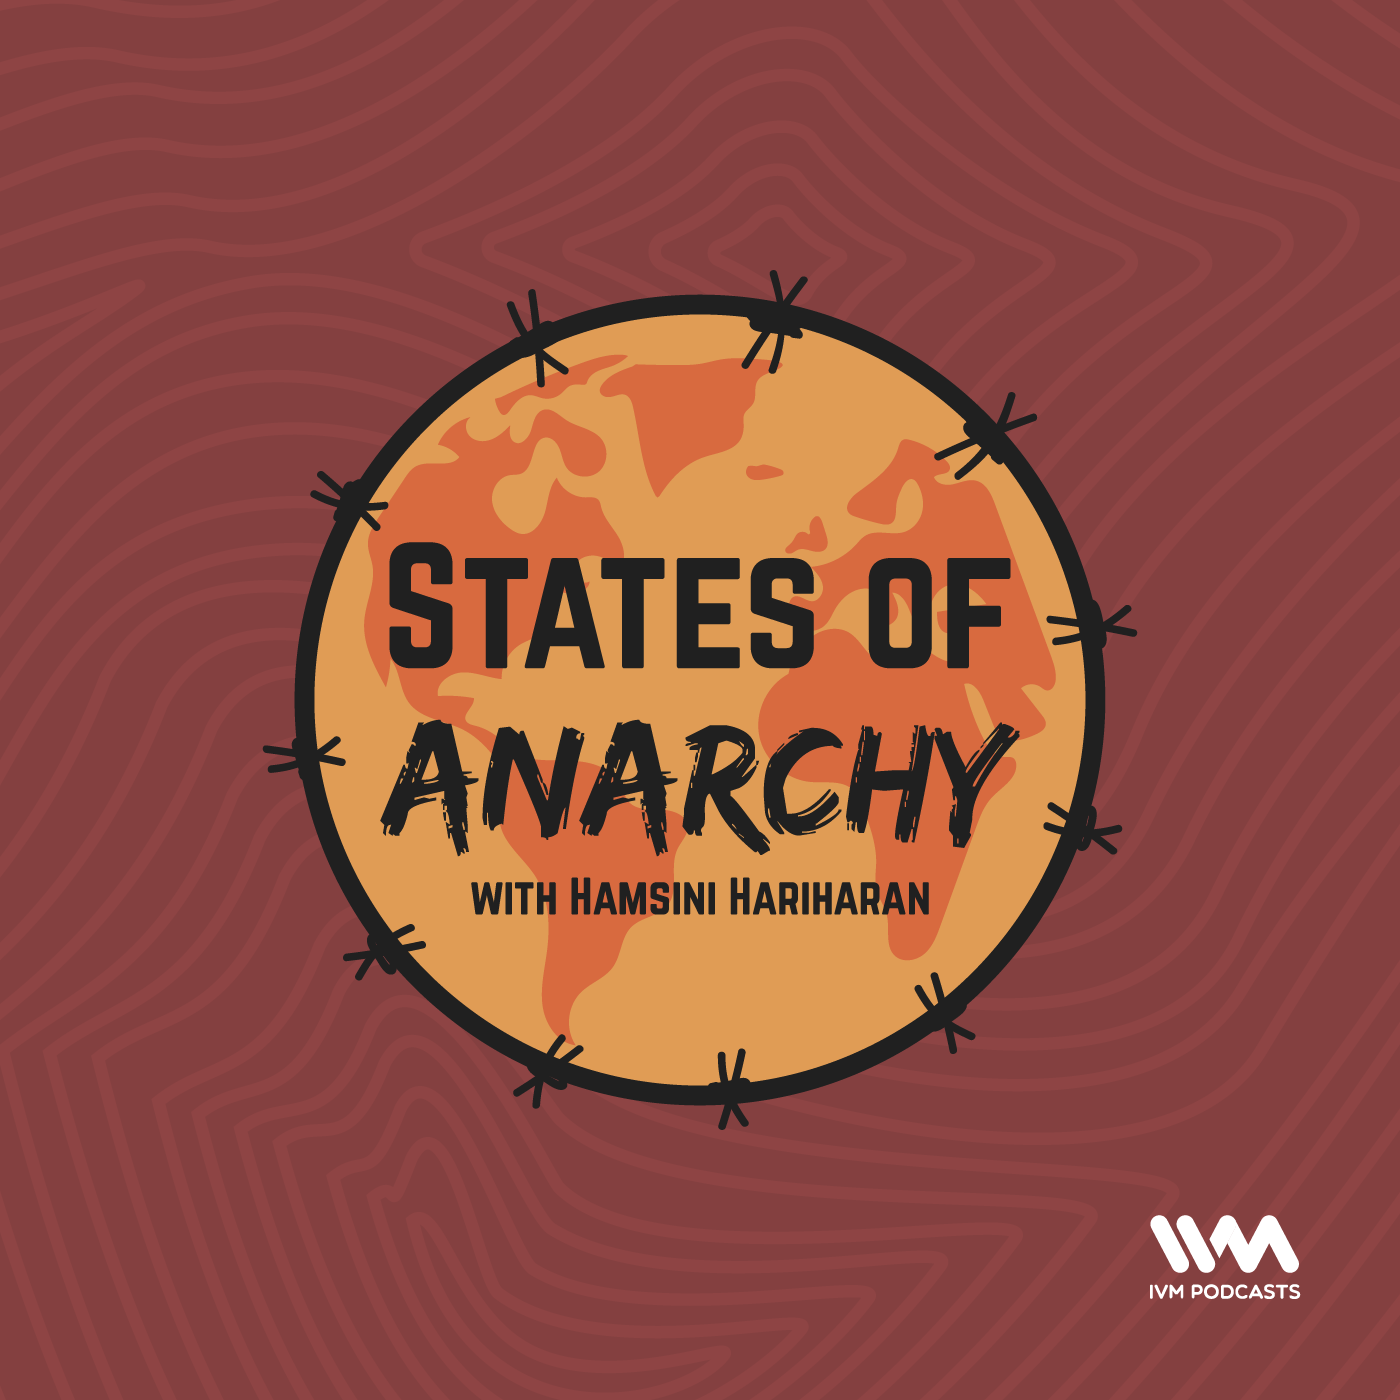 States Of Anarchy With Hamsini Hariharan Ivm Podcasts Indian